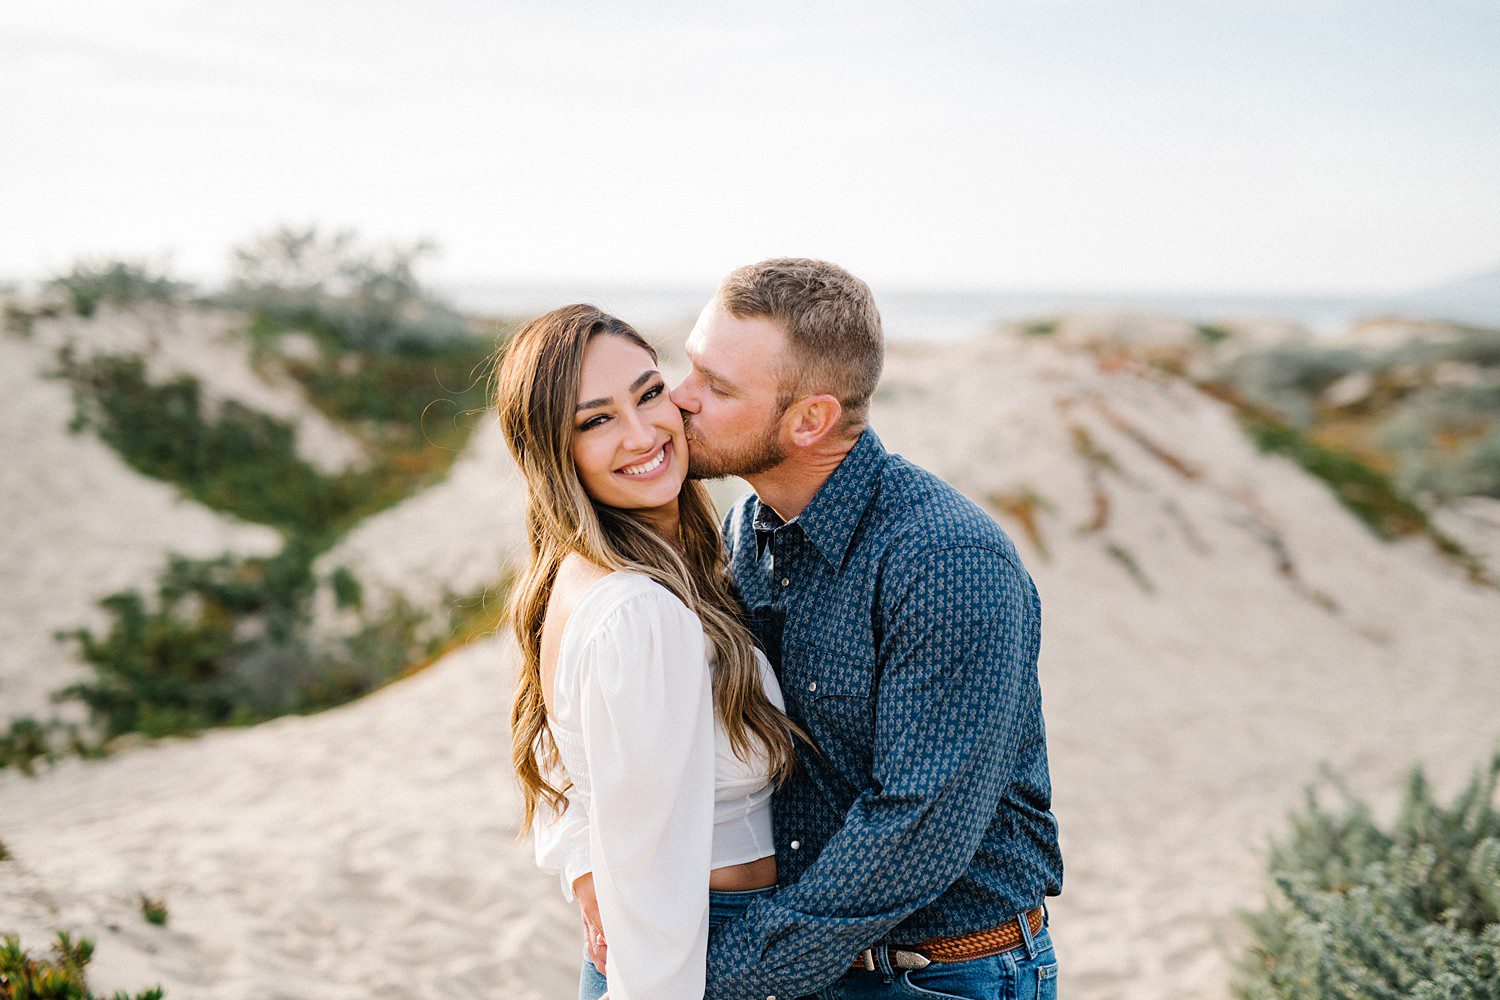 Guy kisses girl's cheek during engagement session on Pismo Beach Dunes by Pismo Beach Engagement Photographer Austyn Elizabeth Photography